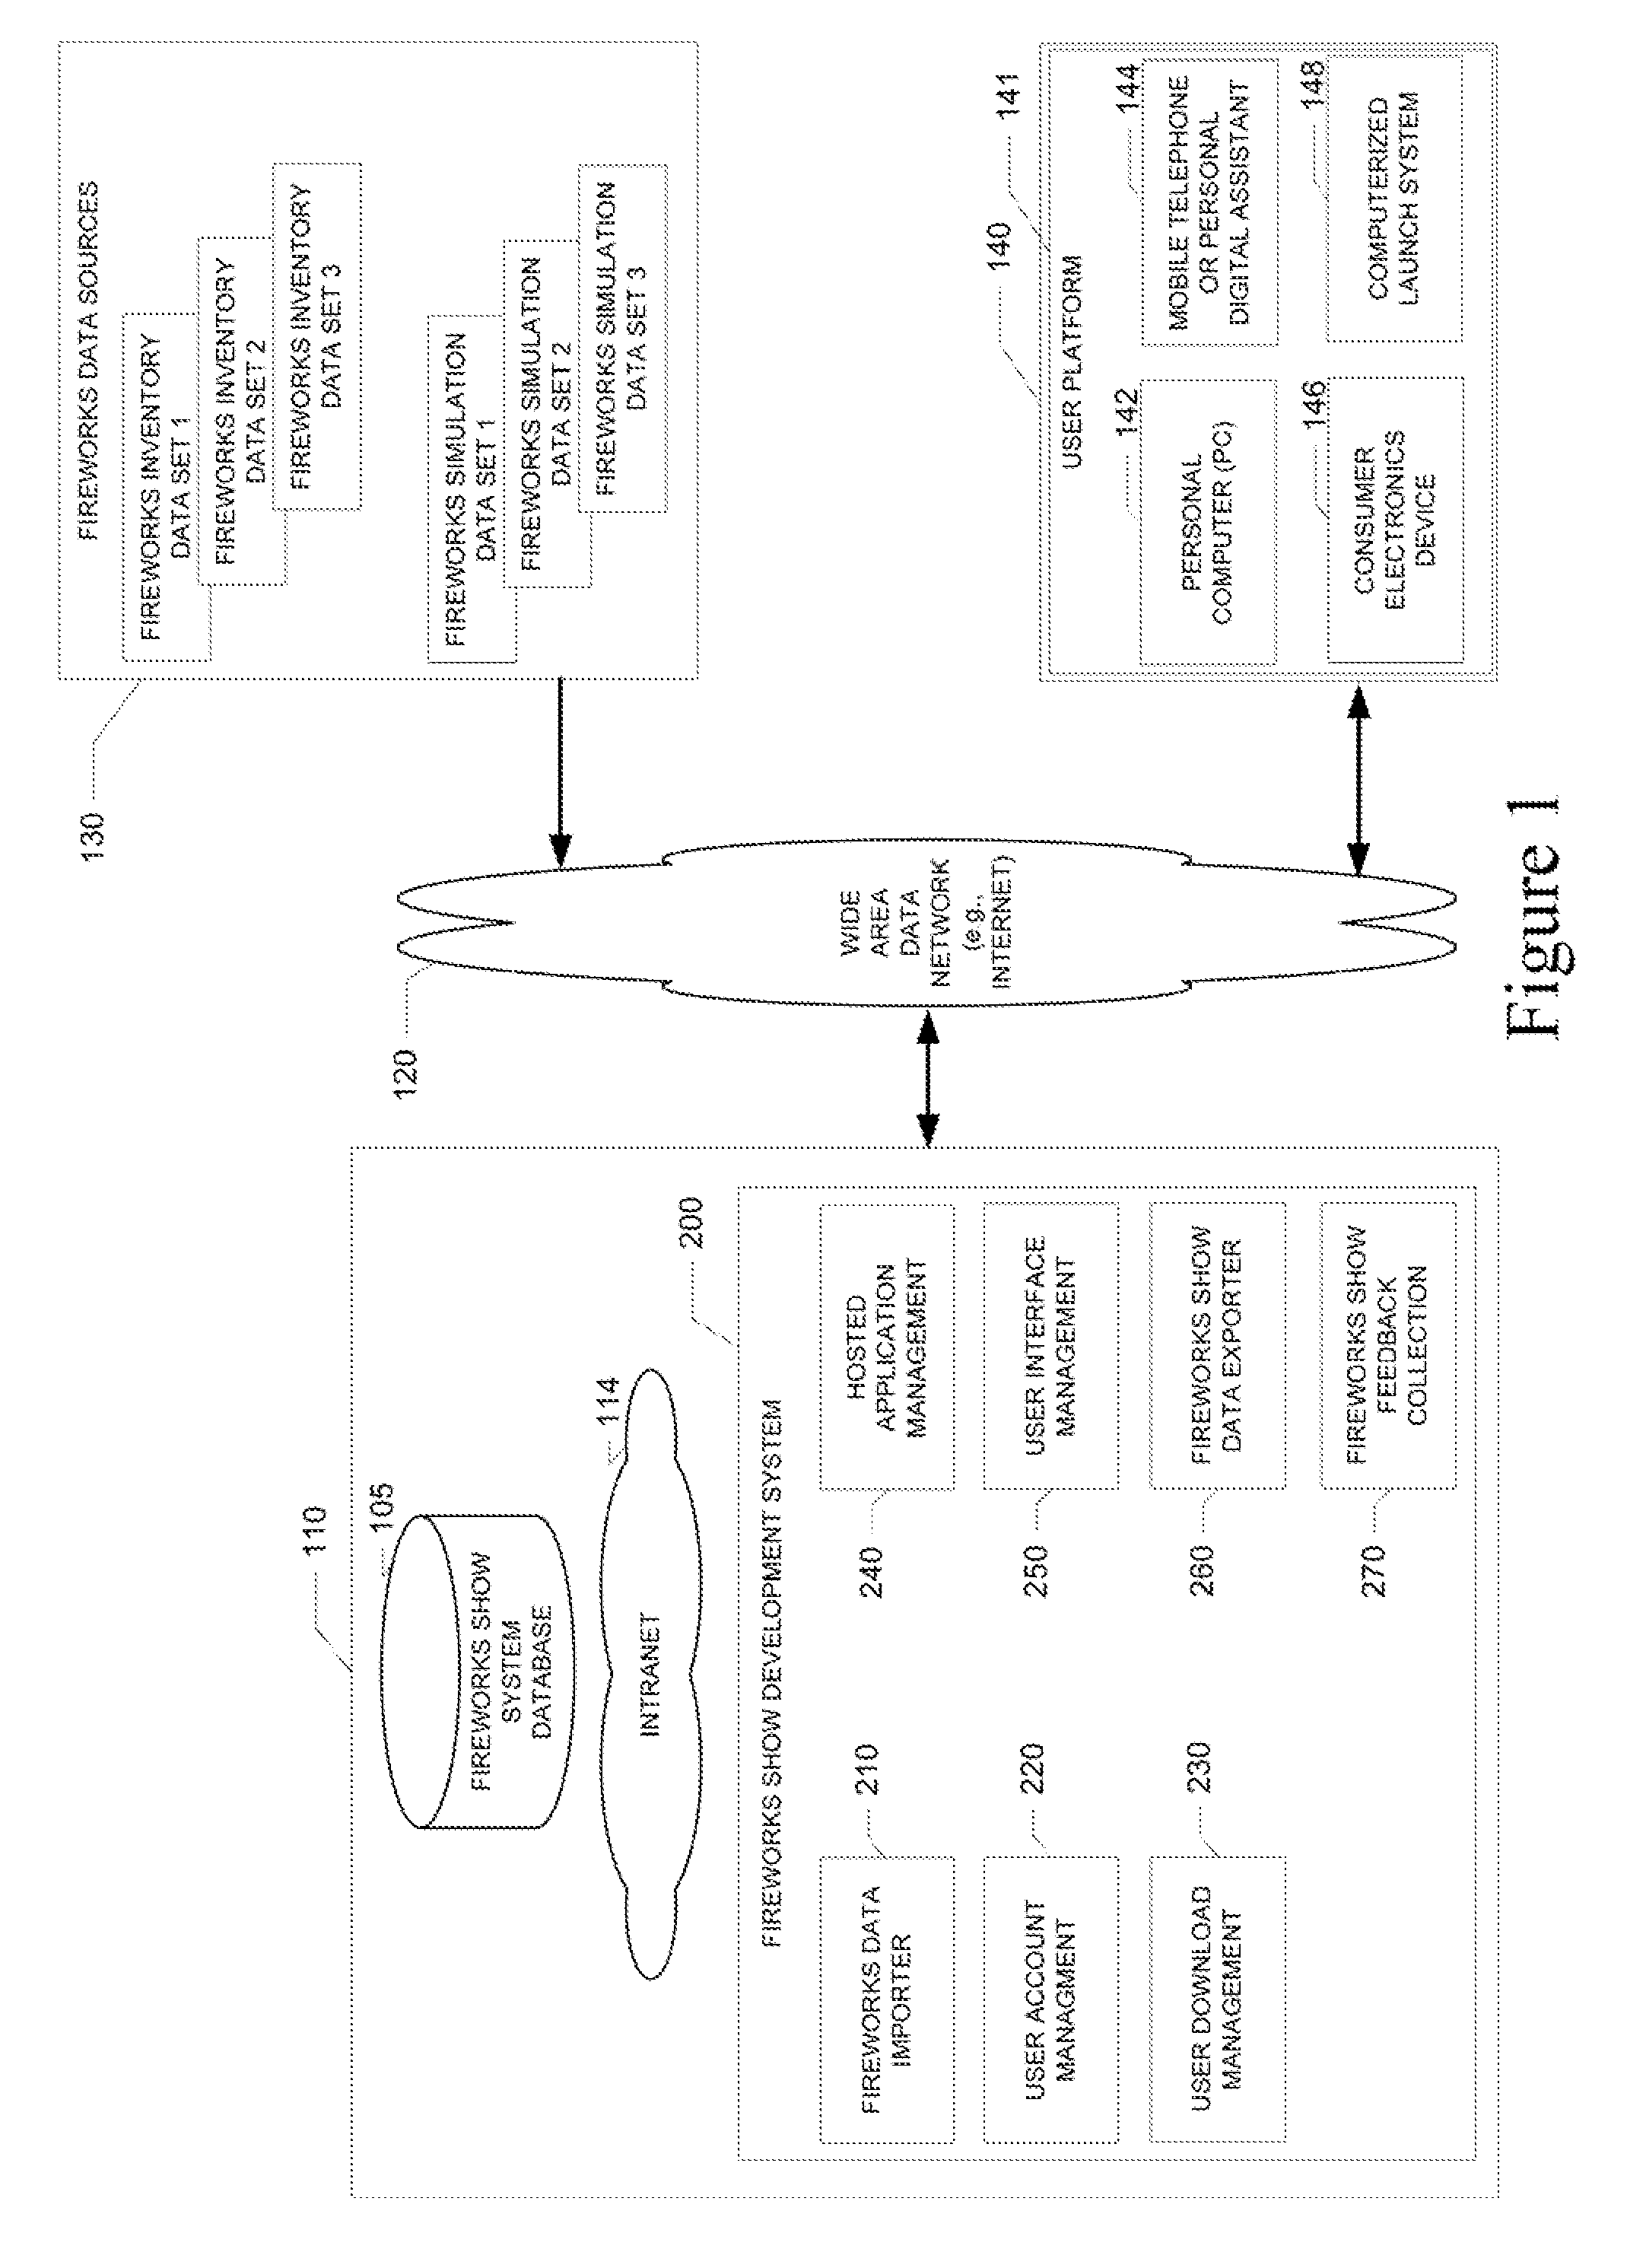 System and method for designing and simulating a fireworks show